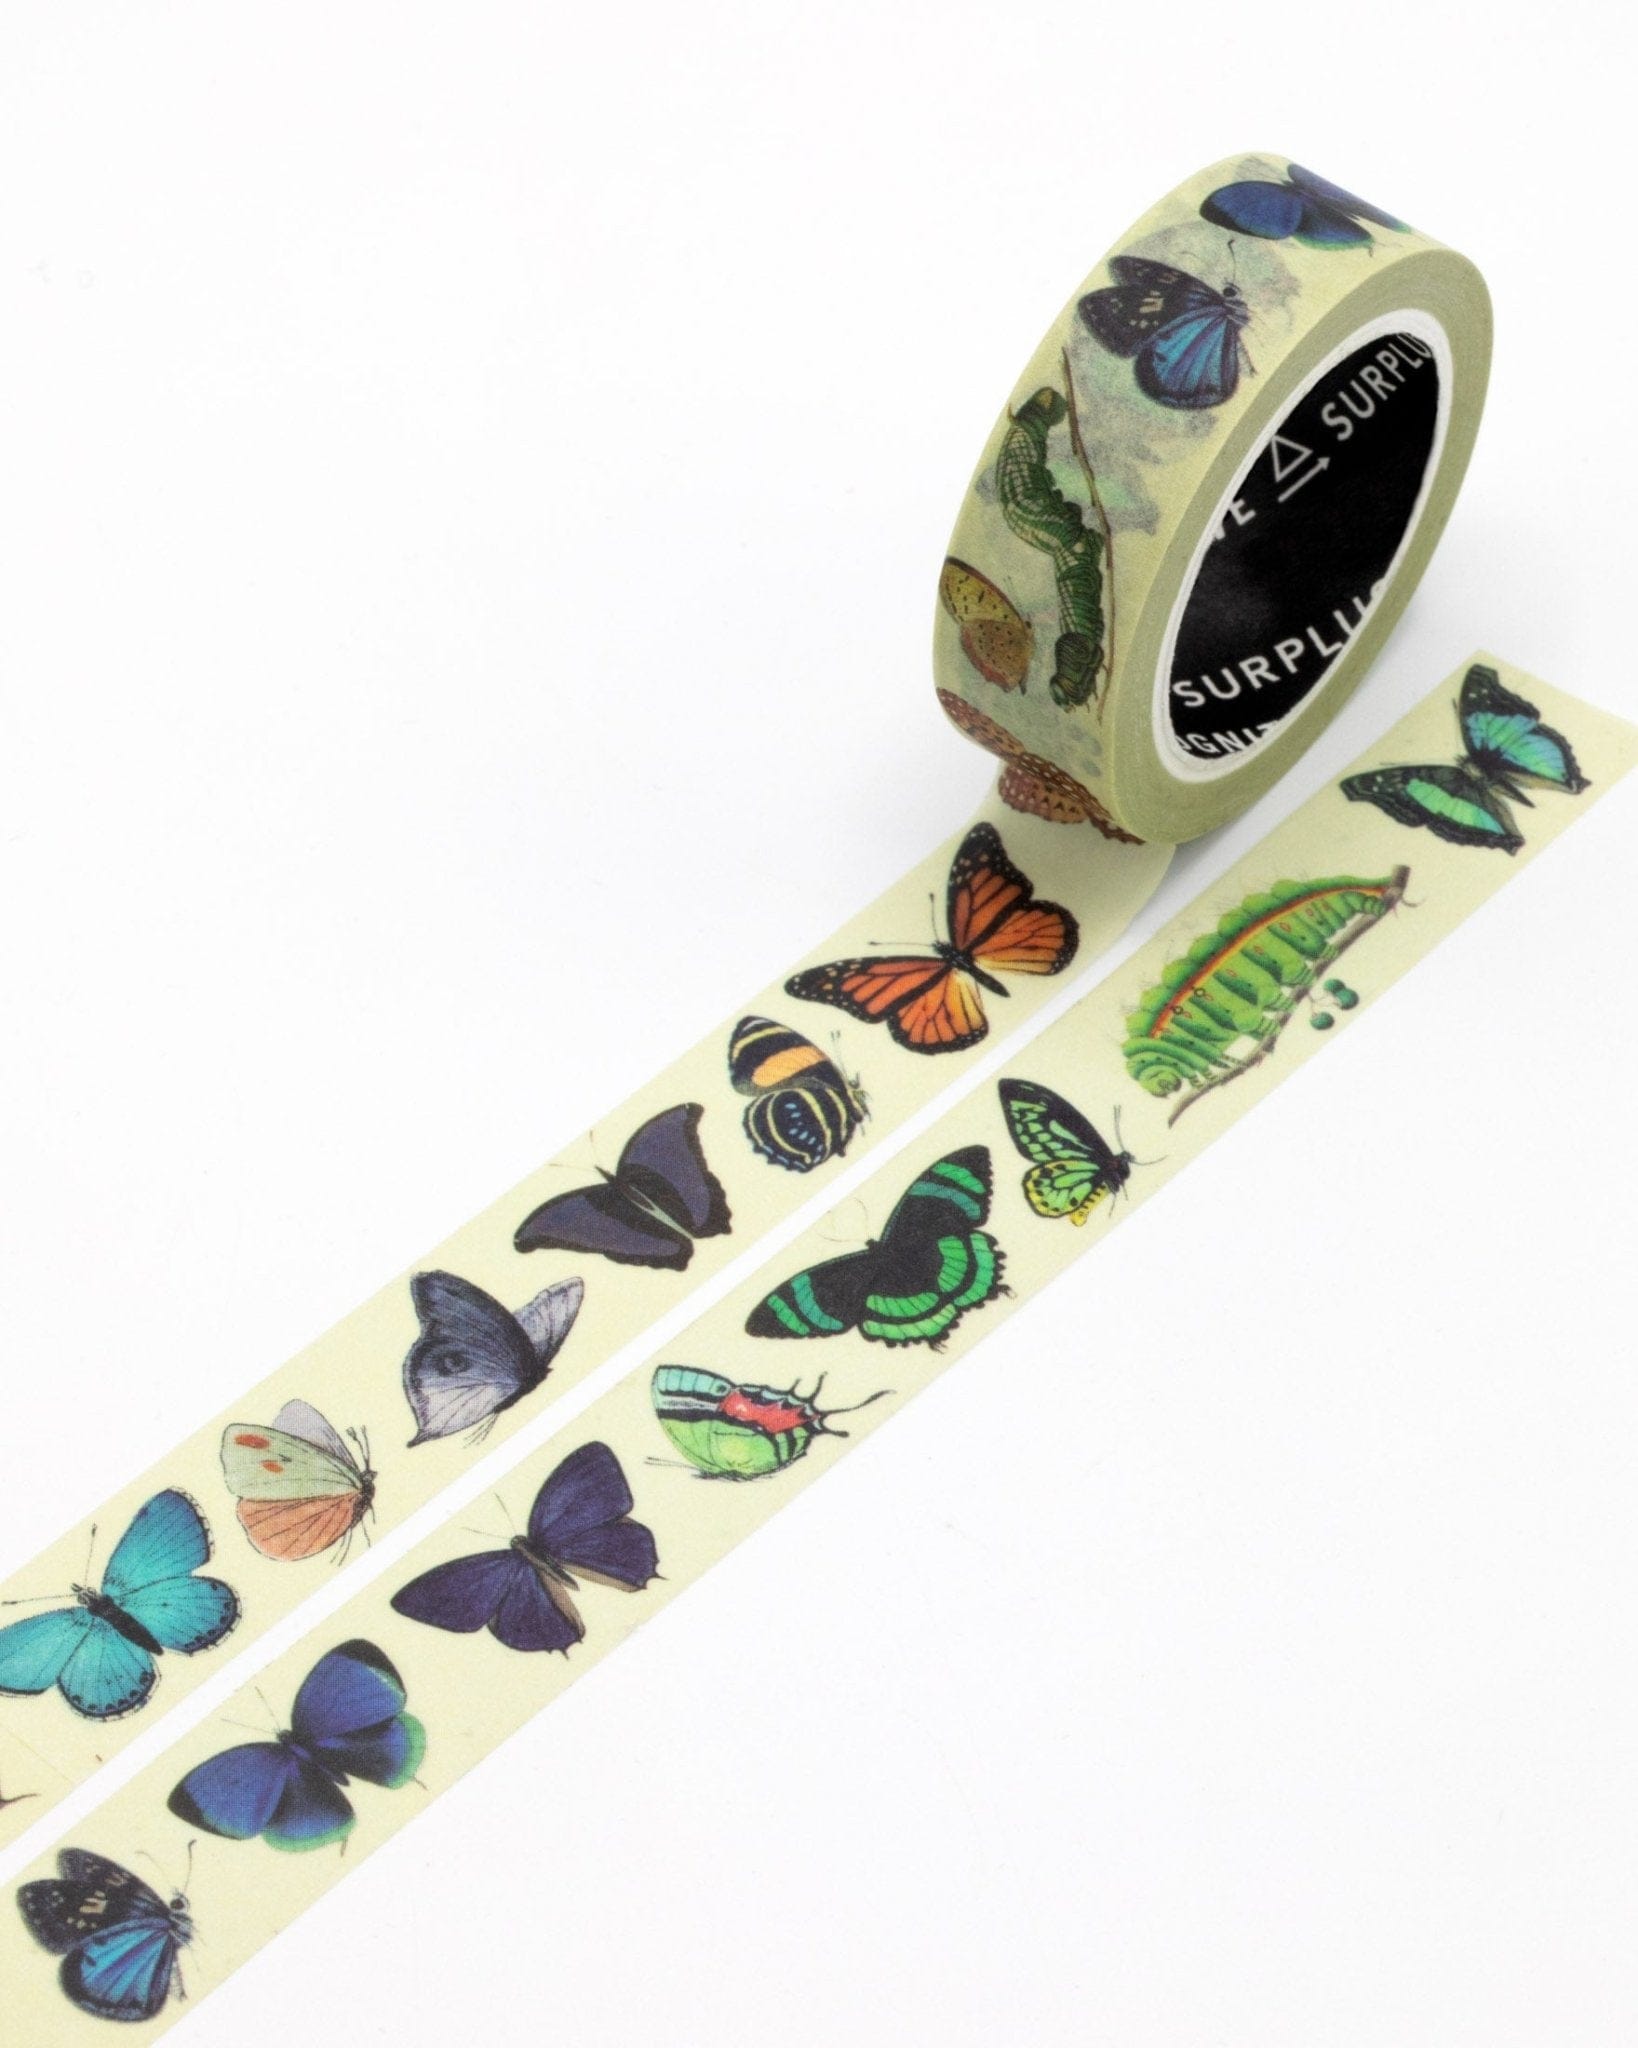 Microbiology: Stentor Washi Tape